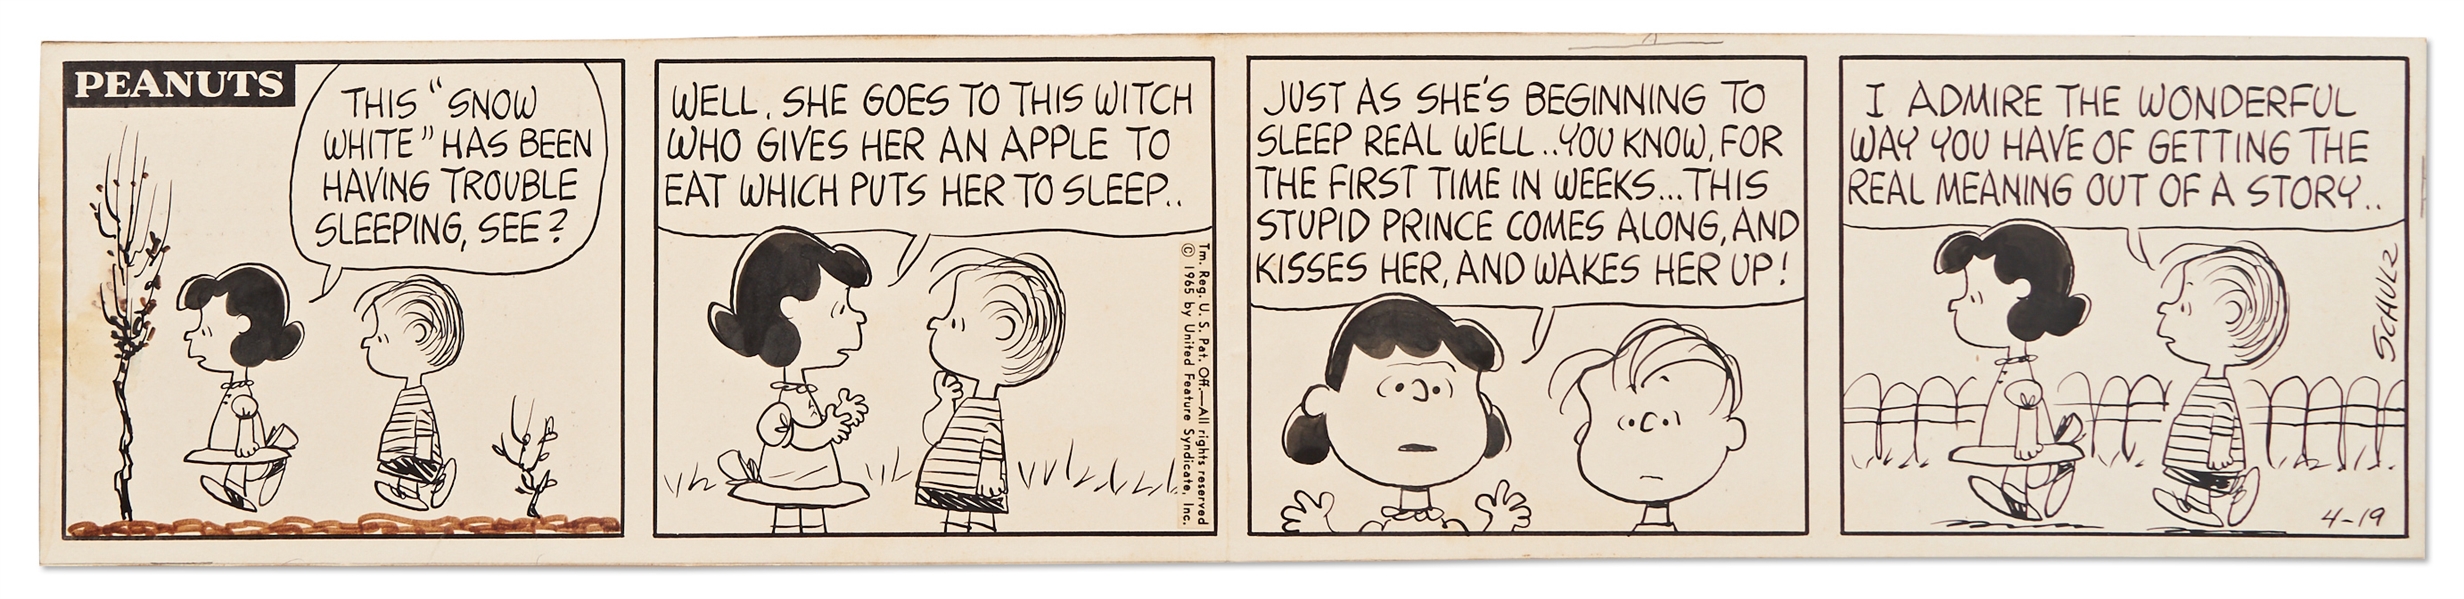 Charles Schulz Original Hand-Drawn ''Peanuts'' Comic Strip from 1965 -- Lucy Explains the ''Snow White'' Fairy Tale to Linus